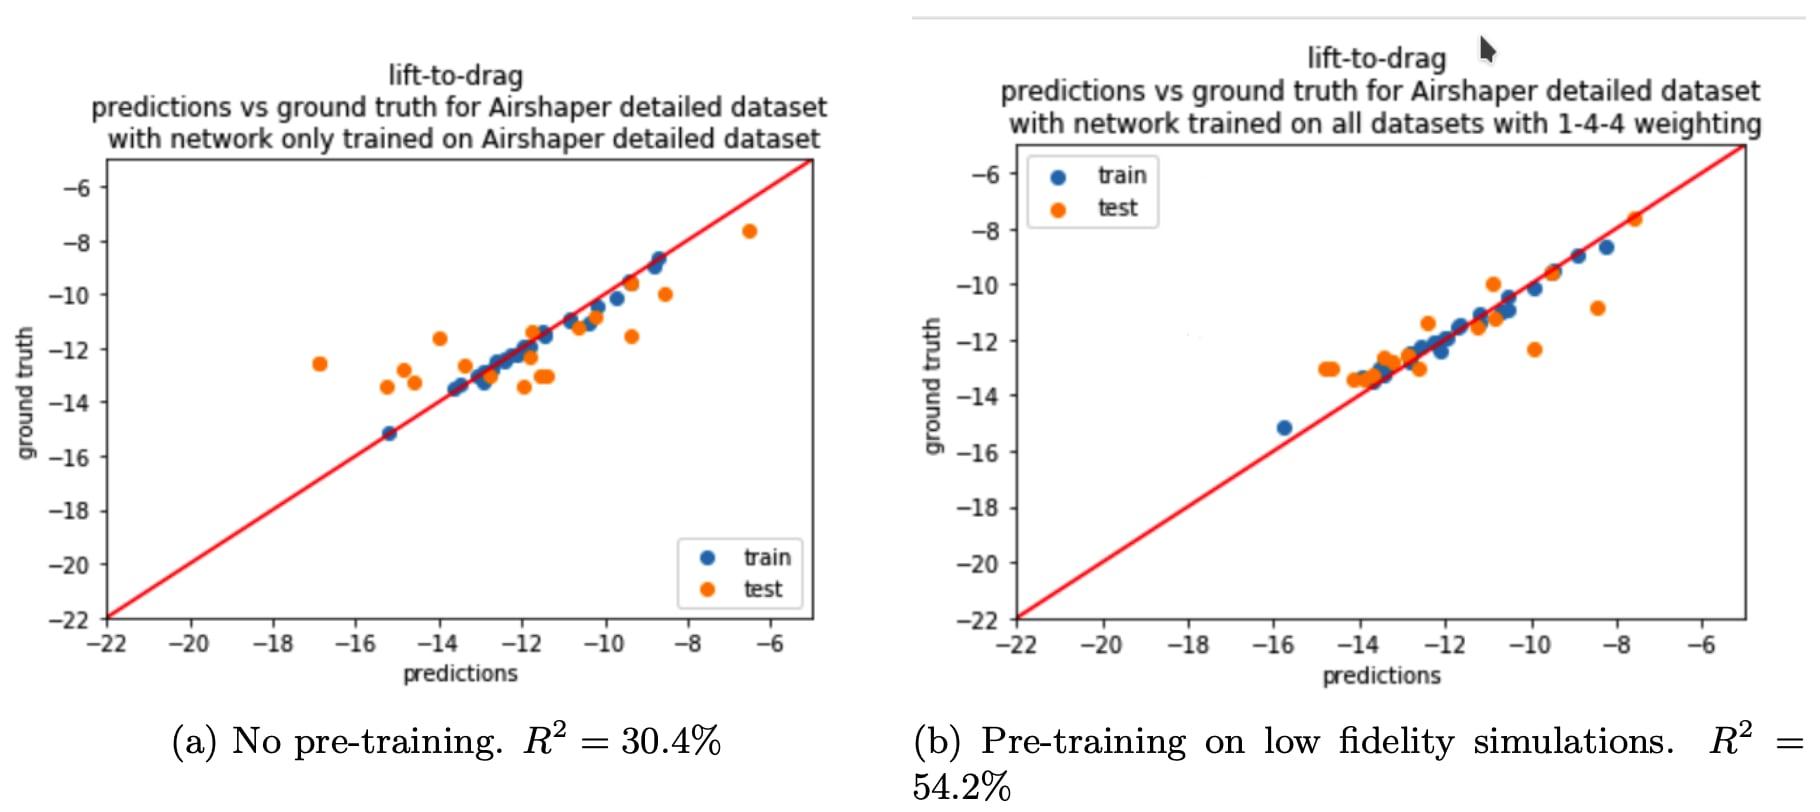 Figure 9: Predictions of L/D ratio on high-fidelity simulations for a model trained on high-fidelity simulations where: (a) The model was trained directly on 50 high-fidelity simulations. (b) The model was pre-trained before on low-fidelity ones. We can see that pre-training the network between fine-tuning it brings a substantial improvement (more than 20%) in R2 error, which motivates the transfer-learning approach.